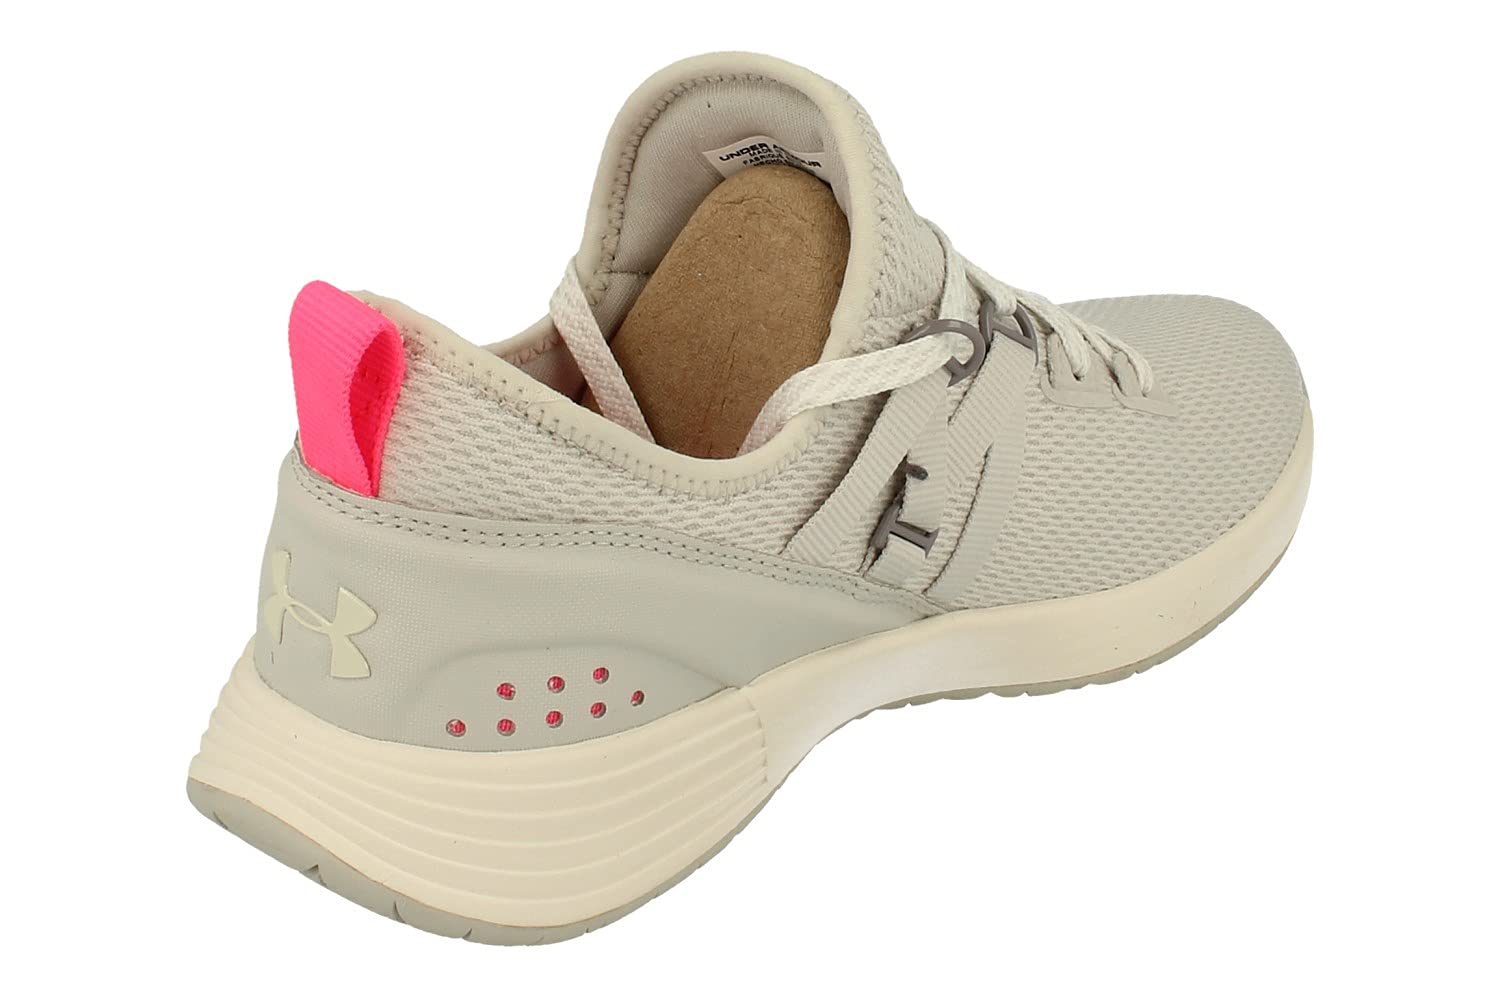 Under Armour Womens Breathe Trainer 3021335 Sneakers Shoes (UK 4.5 US 7 EU 38, Grey 100)